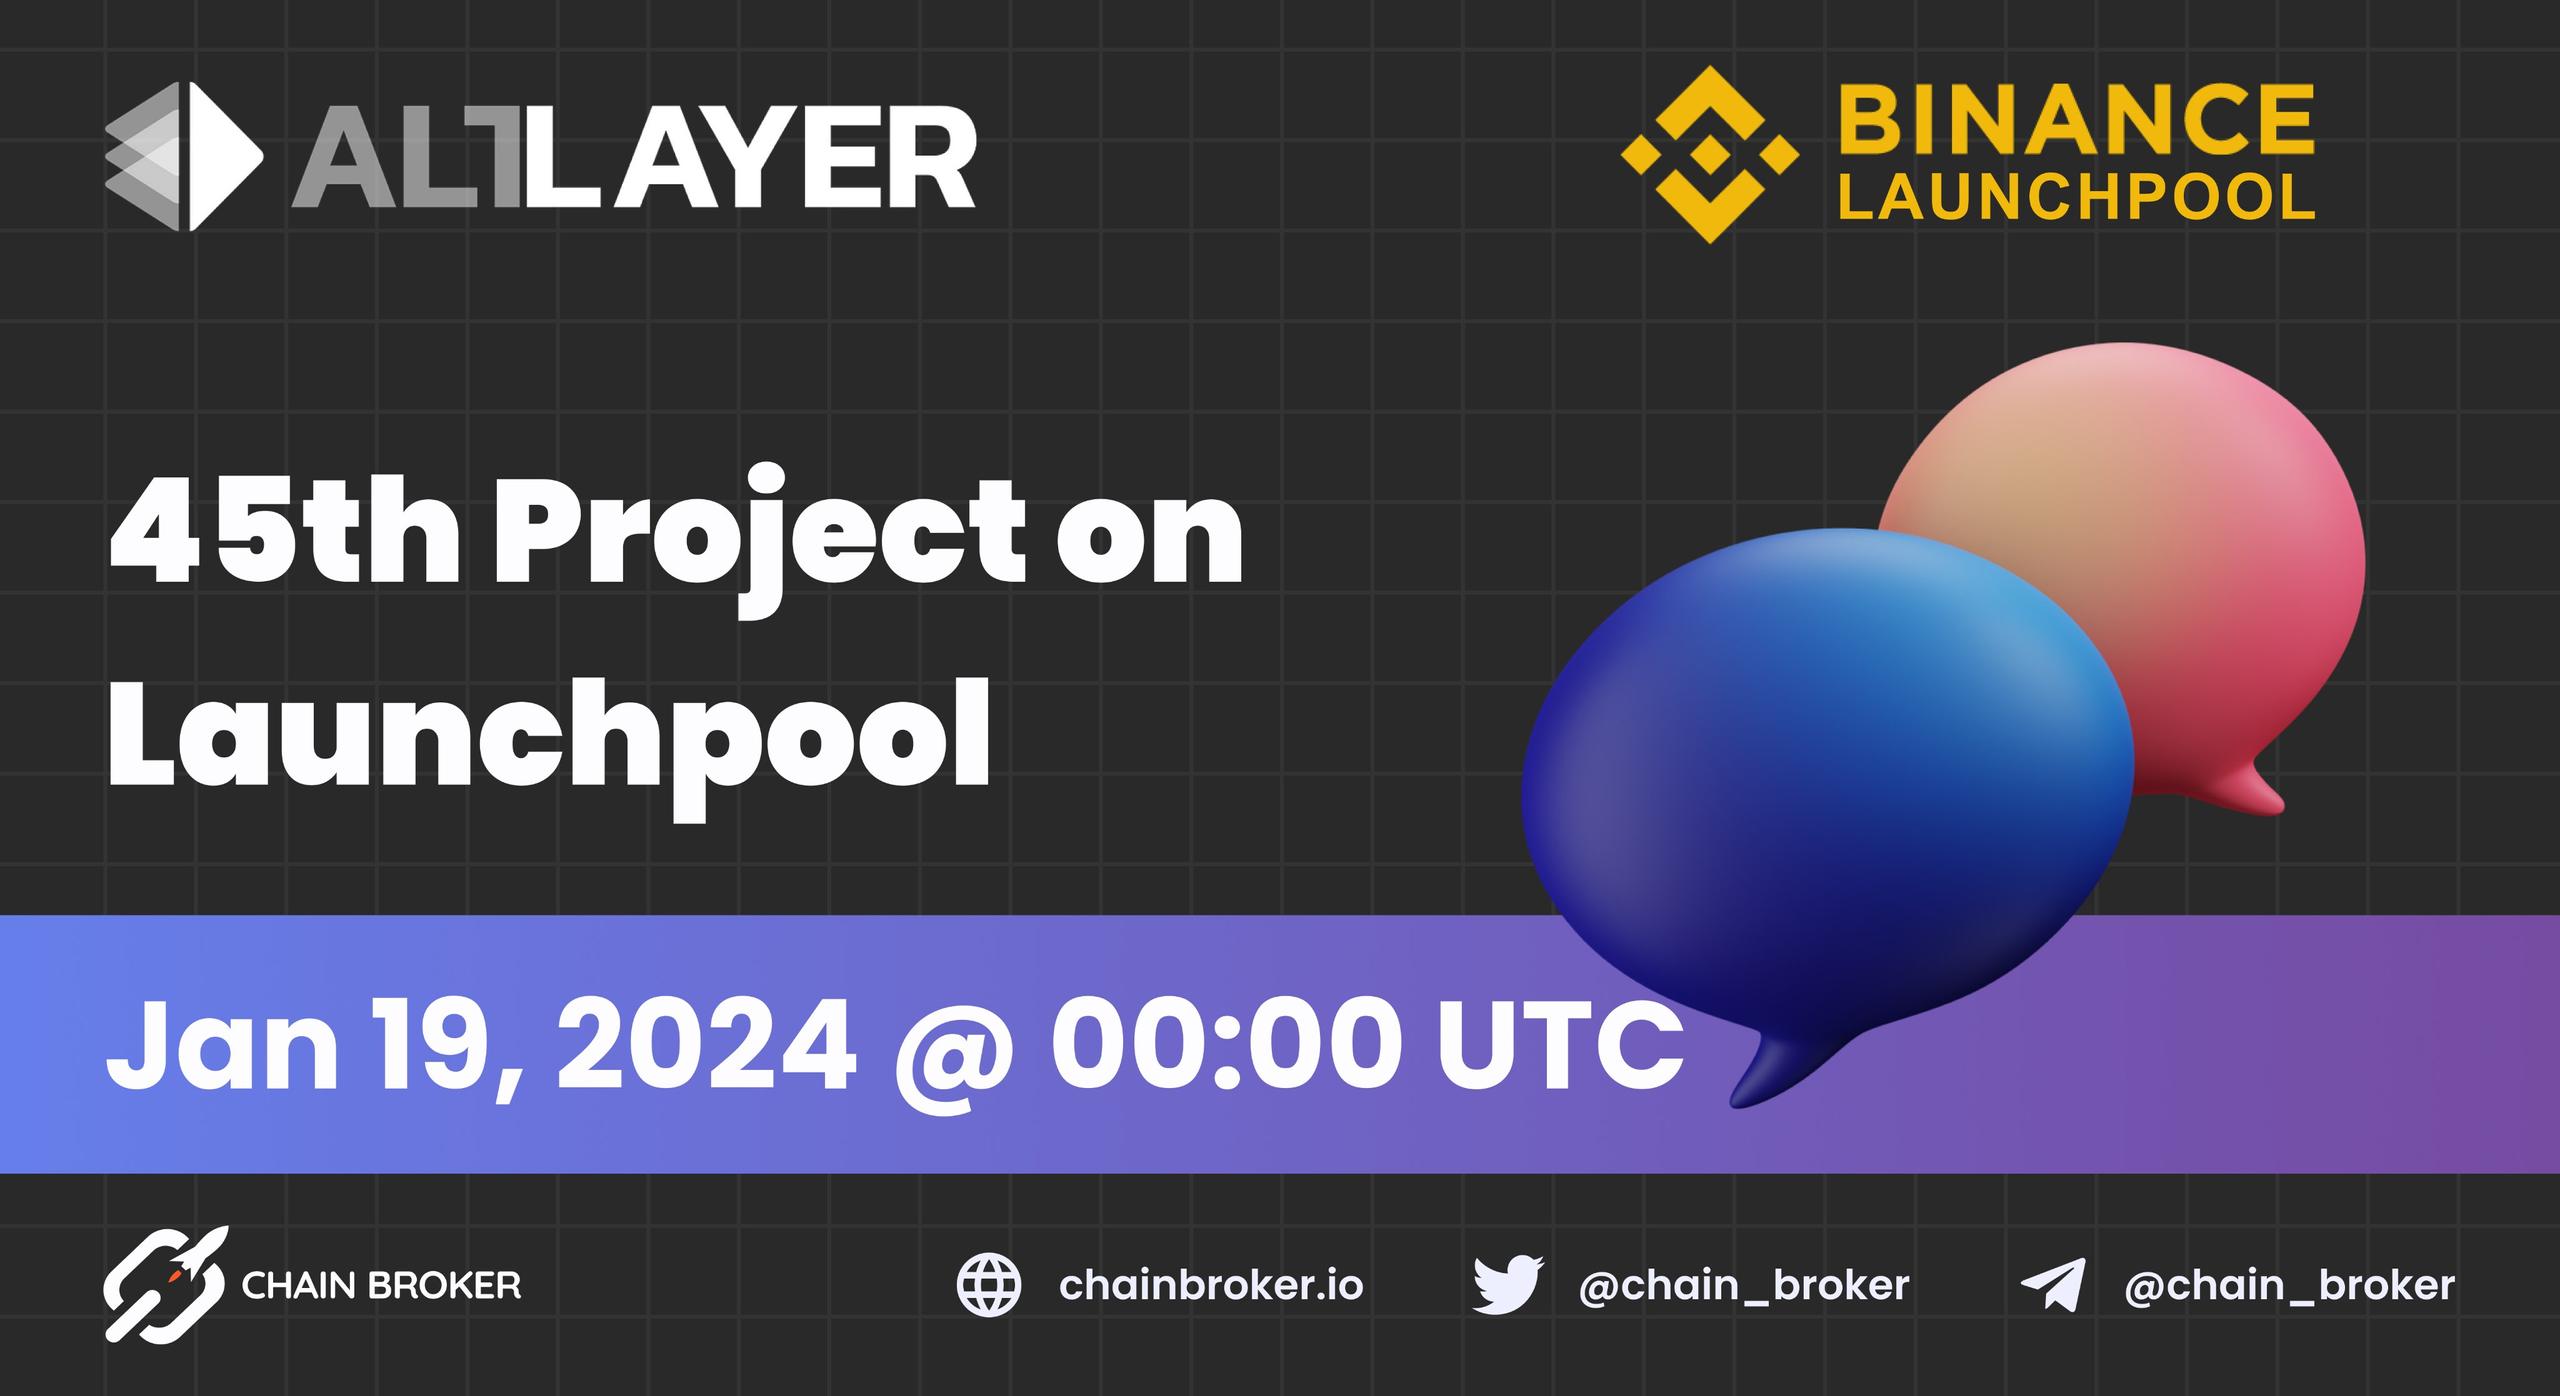 AltLayer is 45th Project on Binance Launchpool